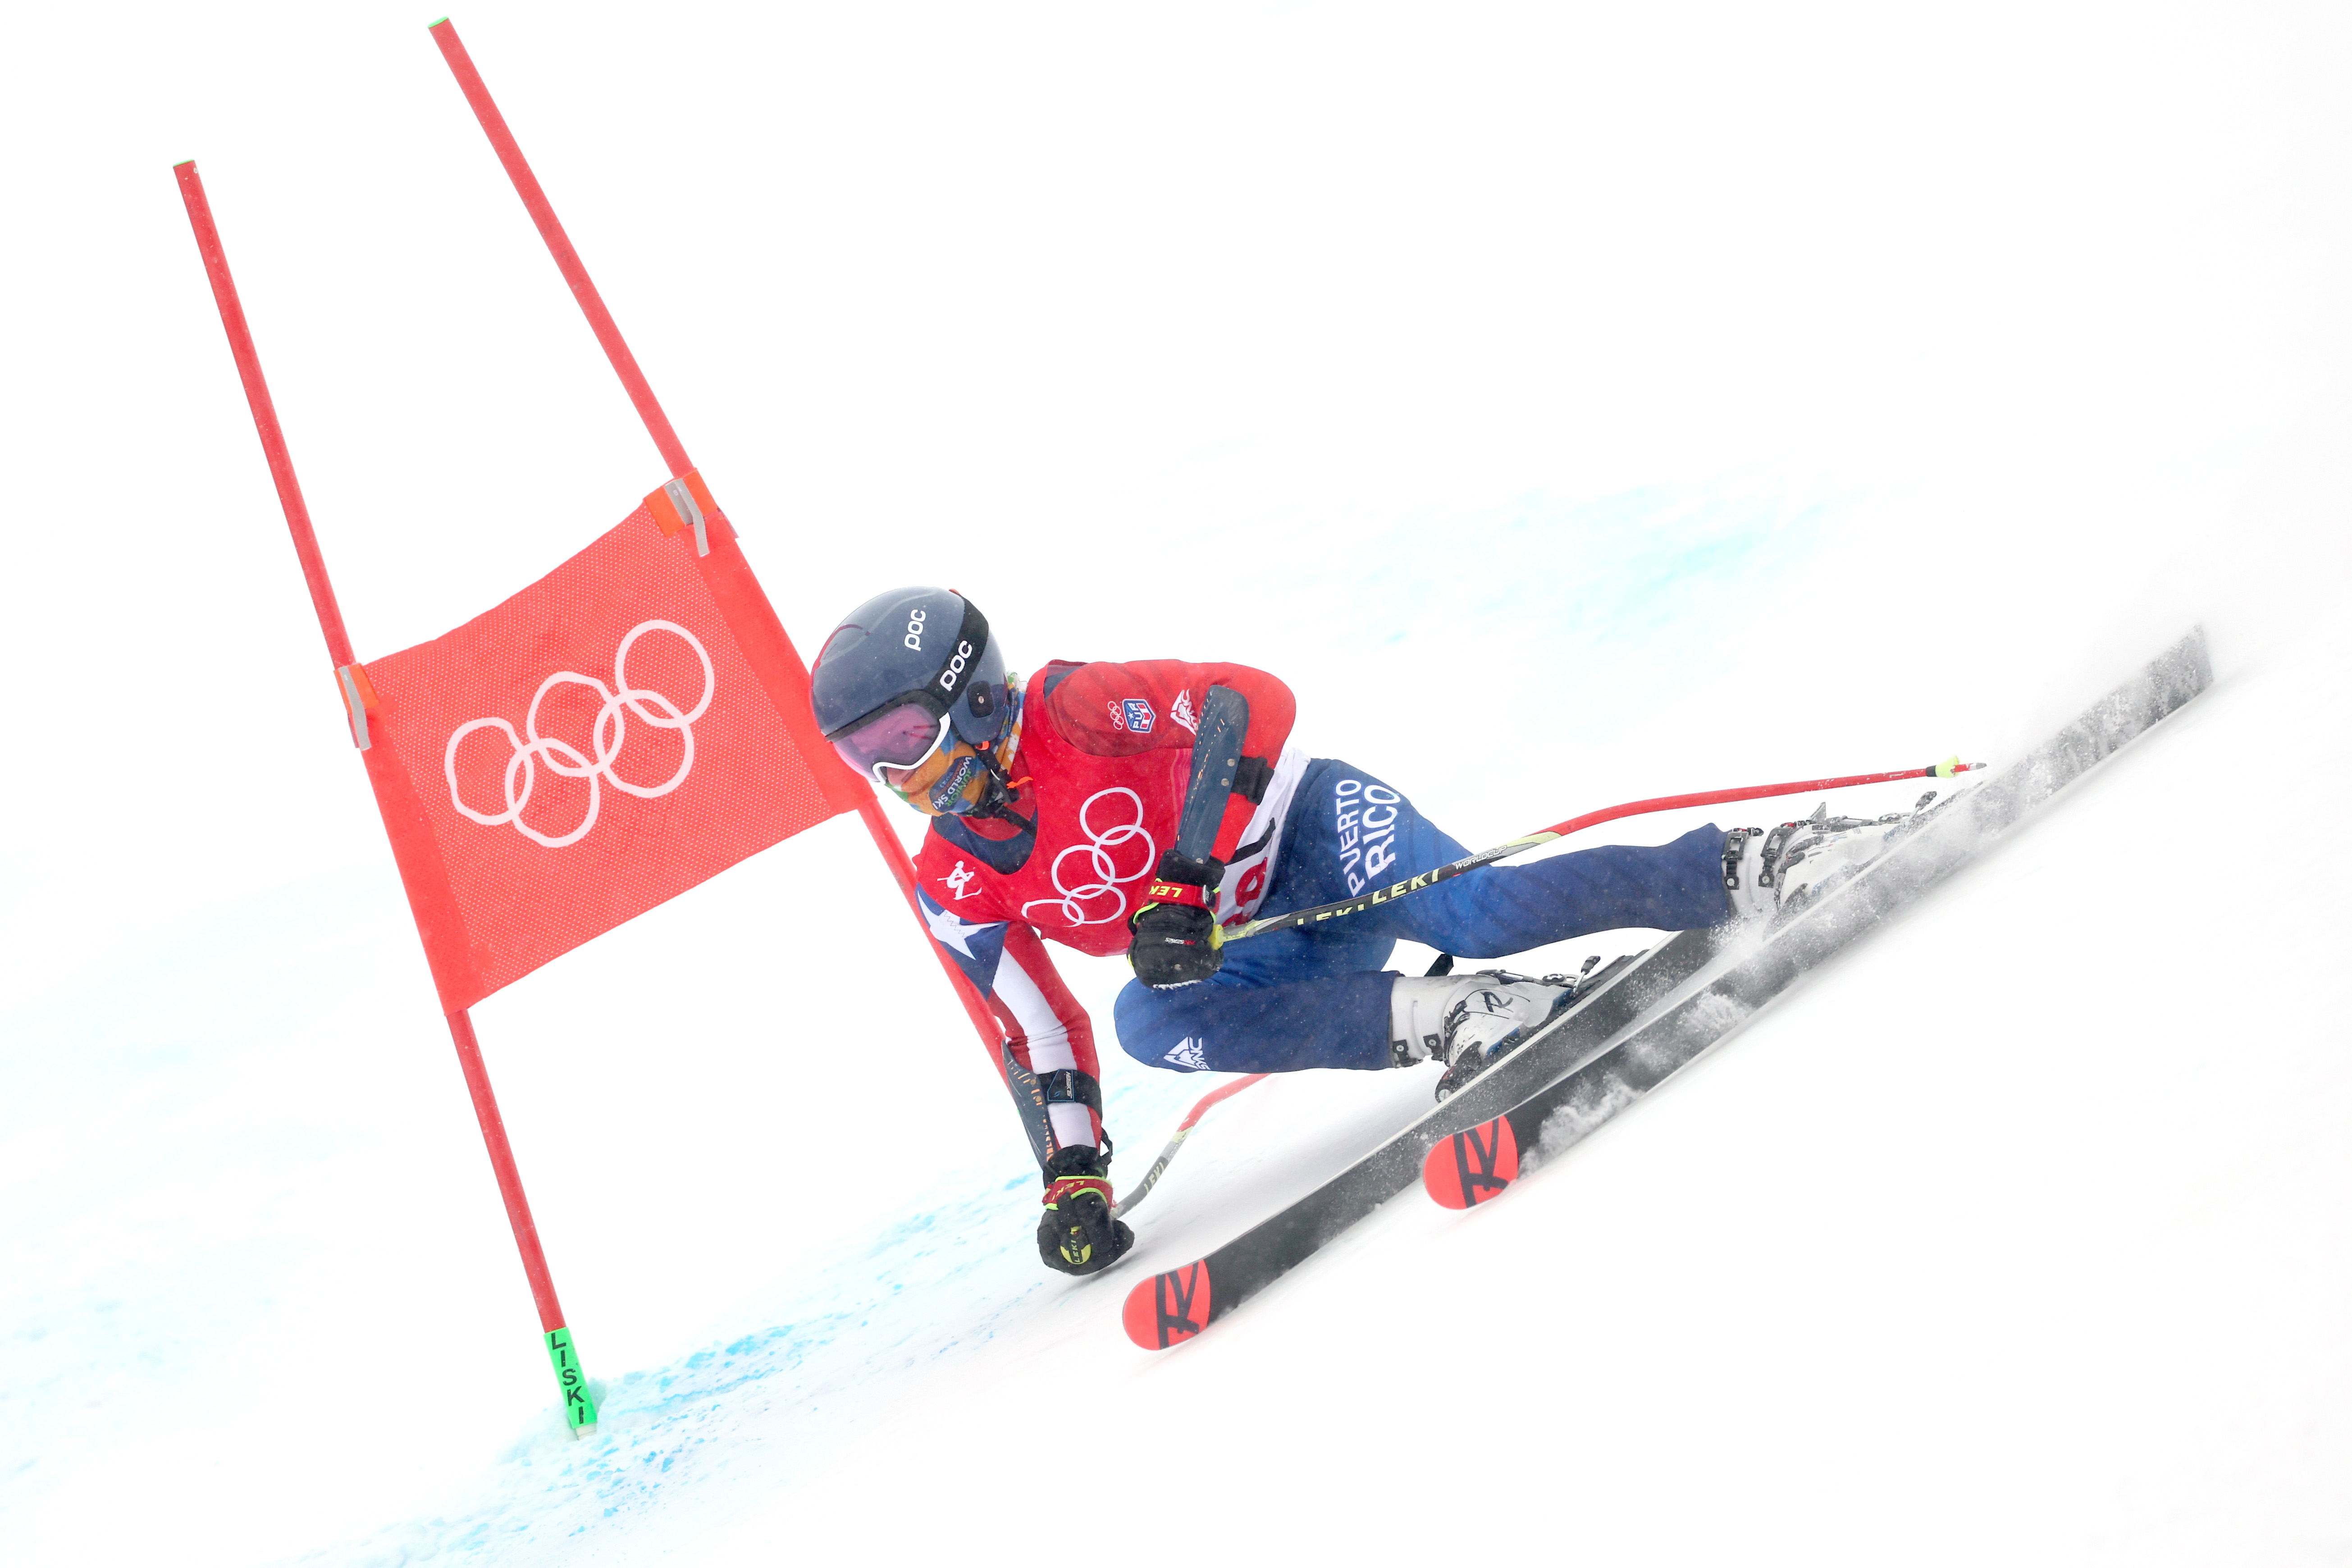 William C. Flaherty of Team Puerto Rico skis during the men's giant slalom on February 13.